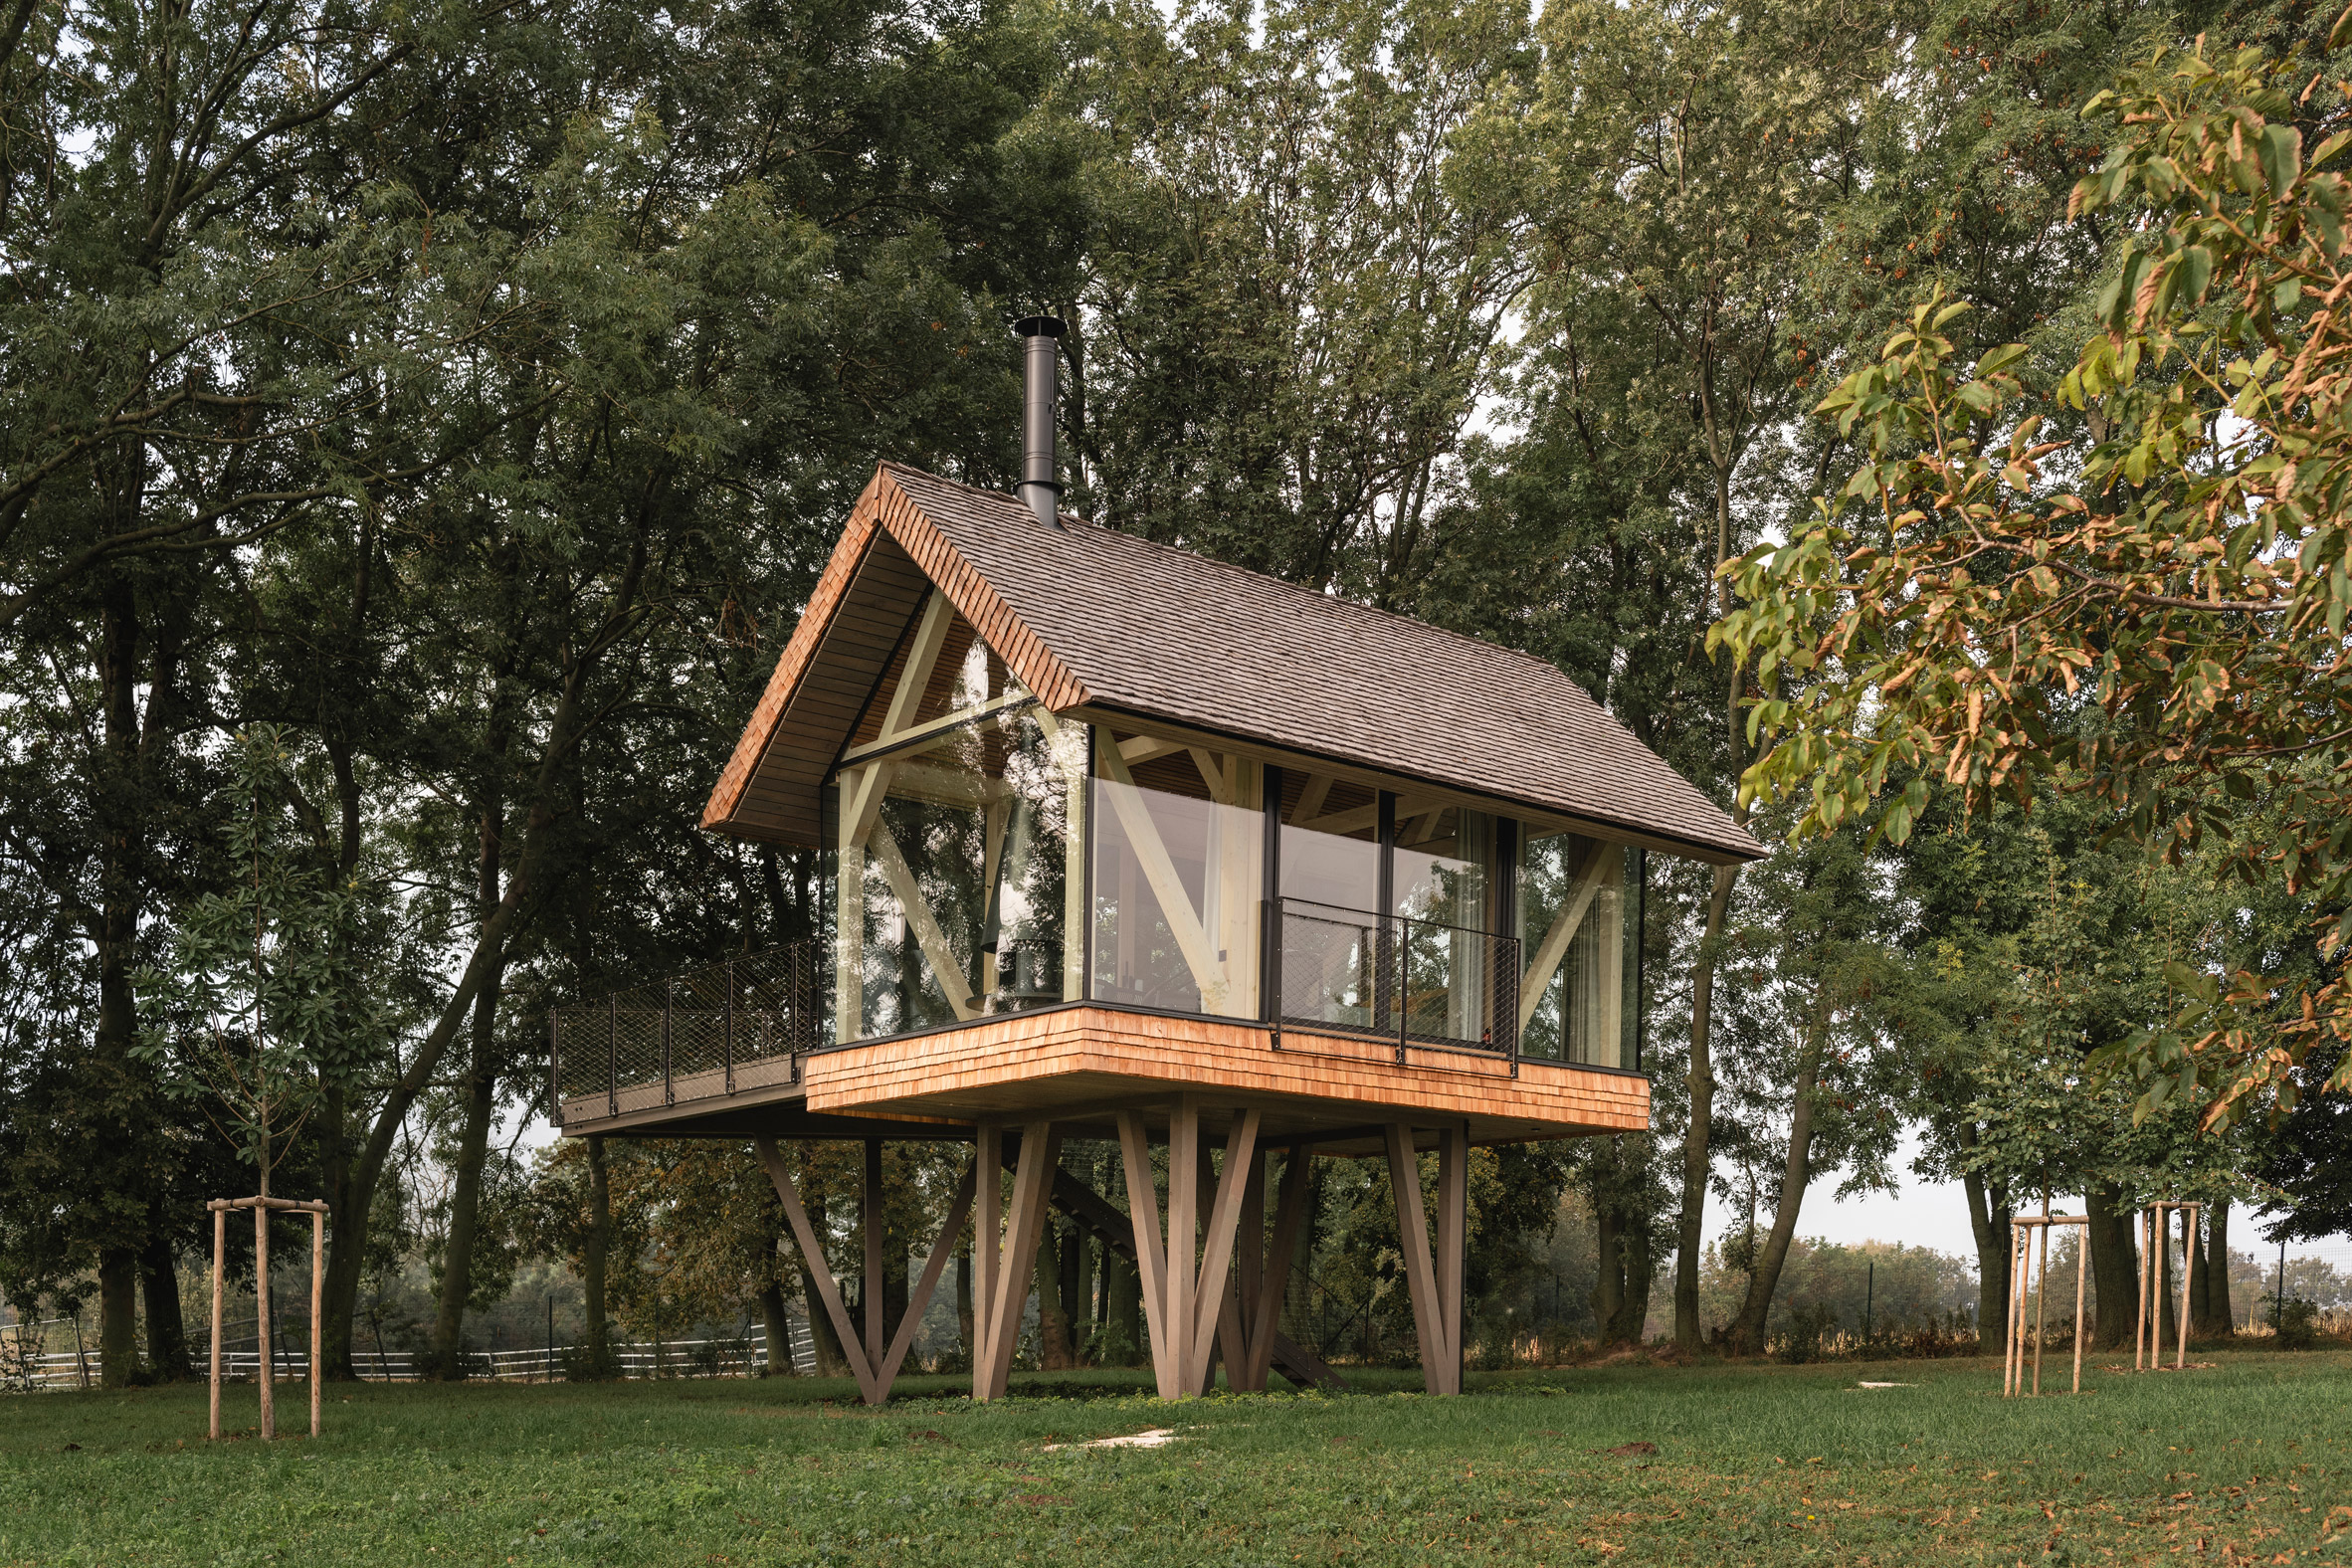 Exterior of glass micro house on stilts by Jan Tyrpekl in Austria